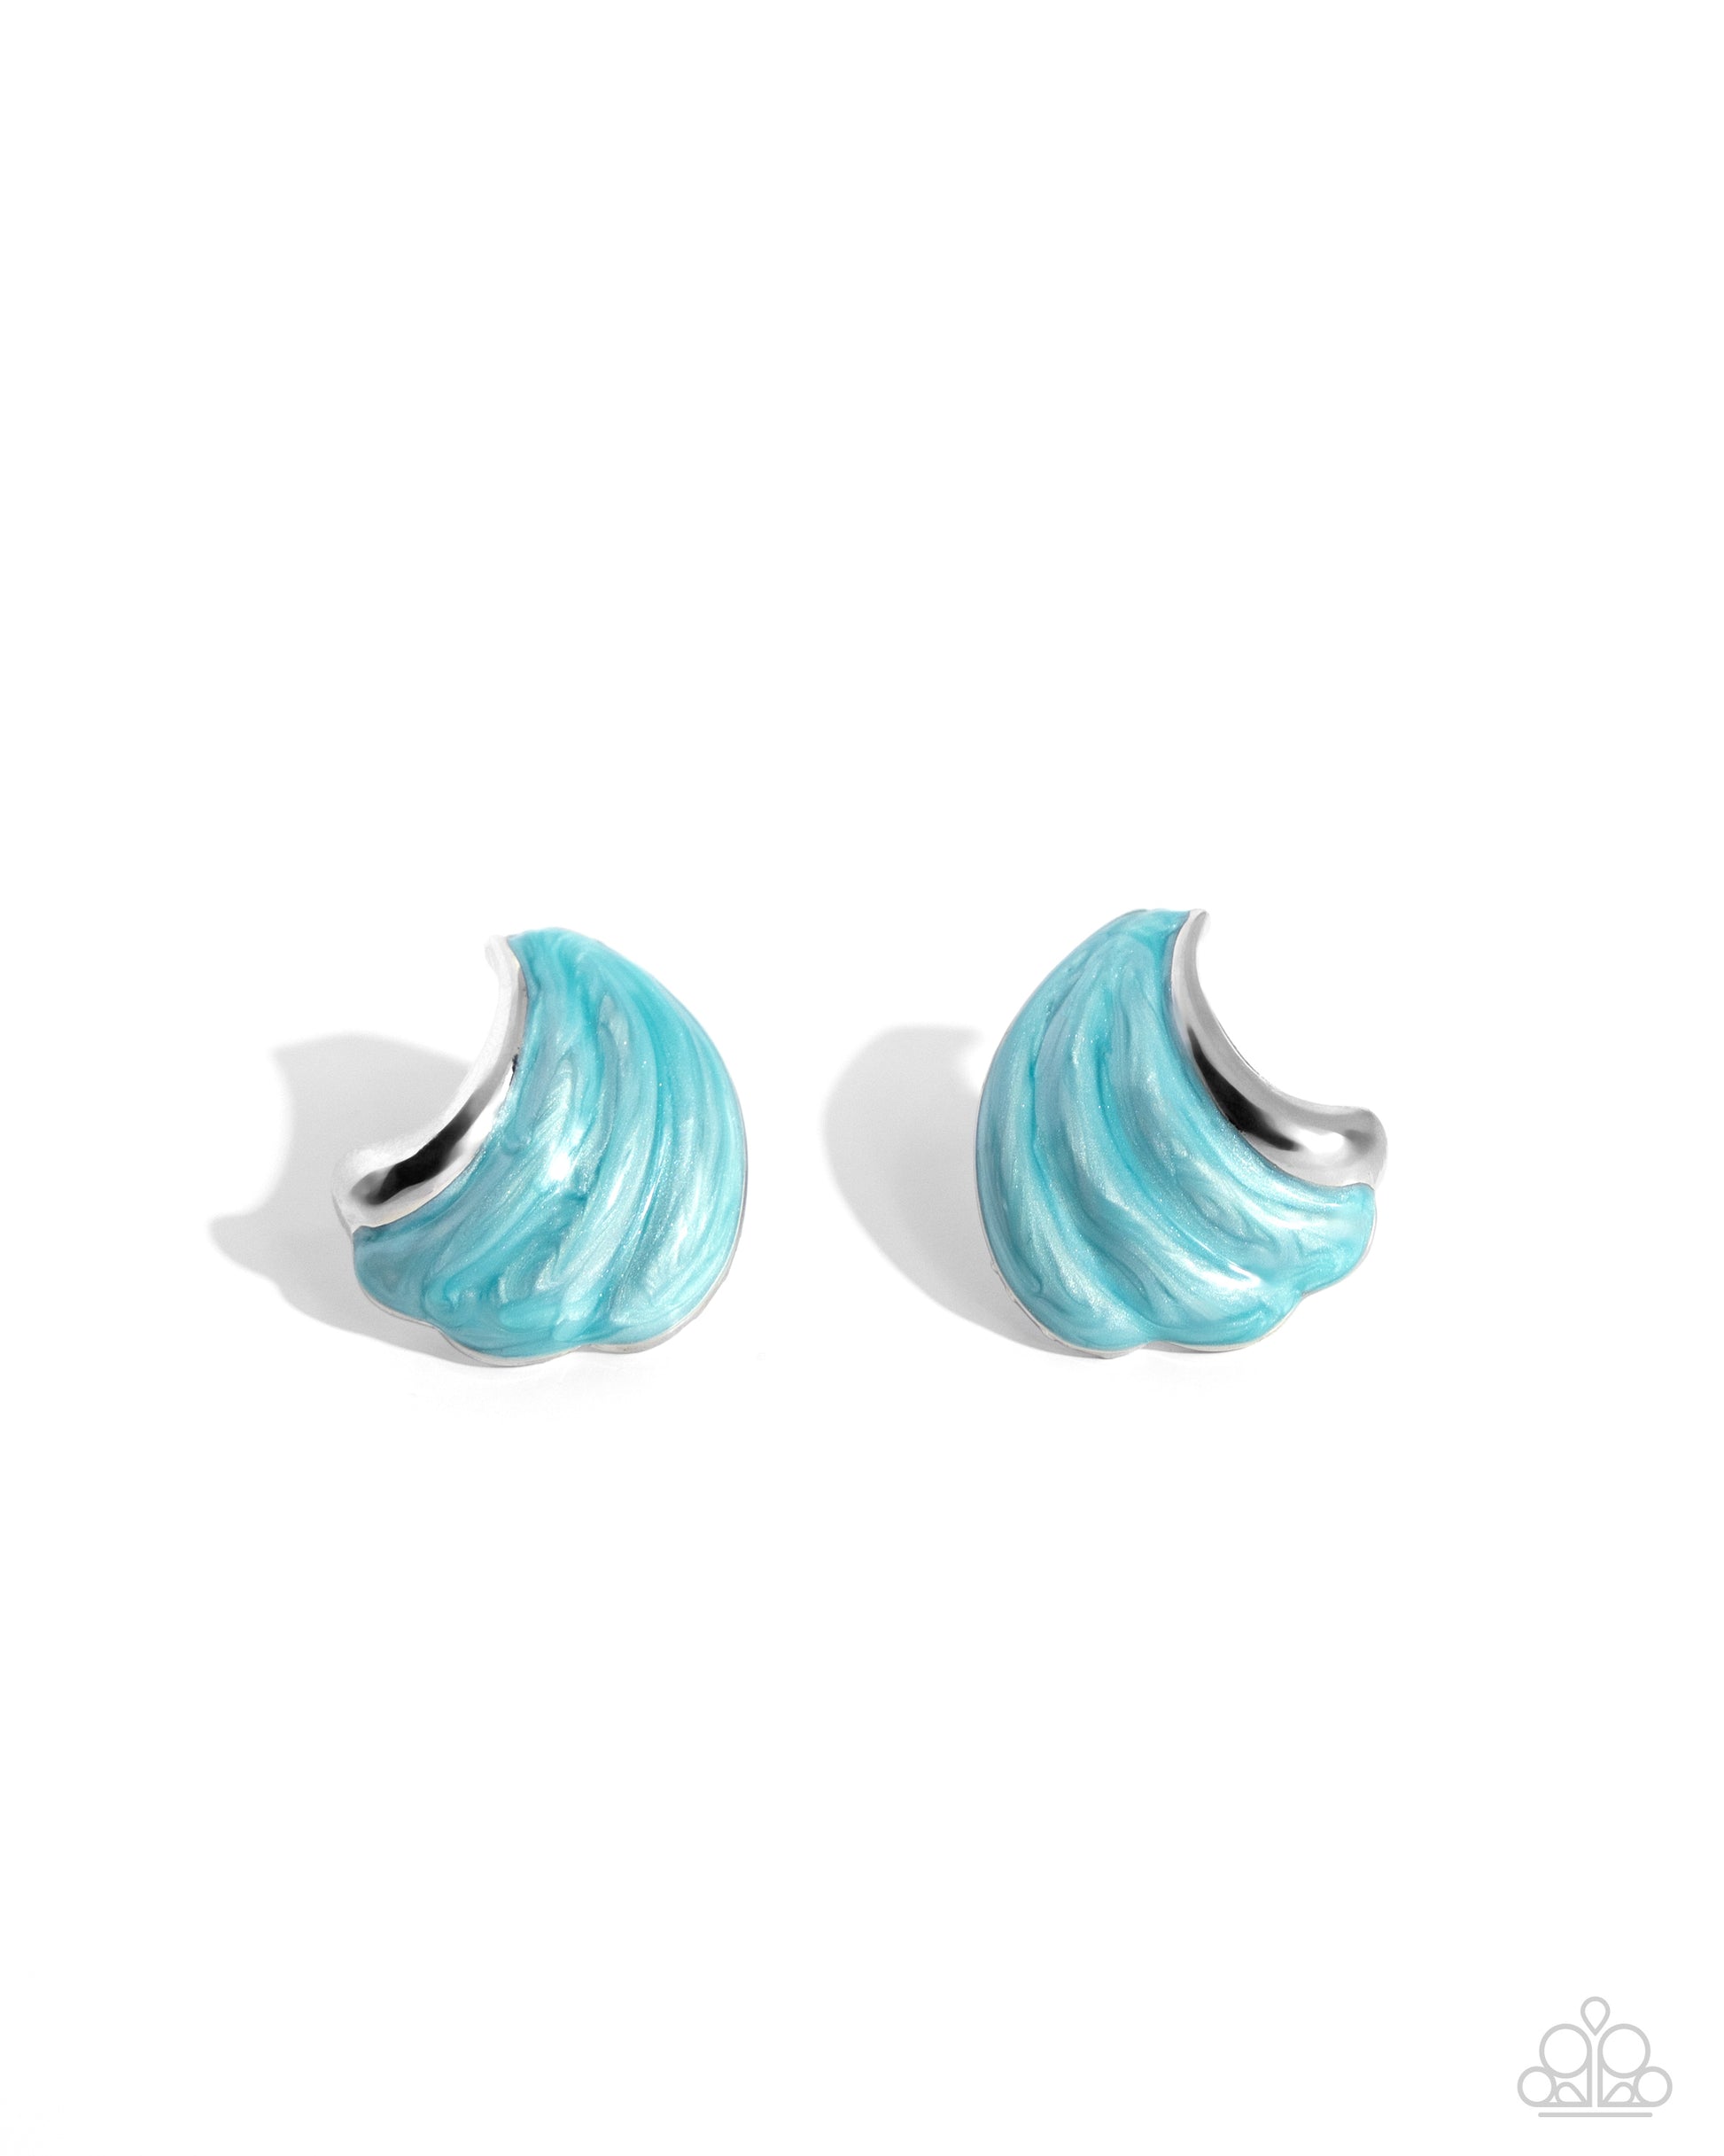 Whimsical Waves Blue Post Earring - Paparazzi Accessories Featuring a Capri pearlized paint, textured silver bars curl up towards the ear in an ocean wave-like manner for a coastal centerpiece. Earring attaches to a standard post fitting. Sold as one pair of post earrings. SKU: P5PO-BLXX-164XX